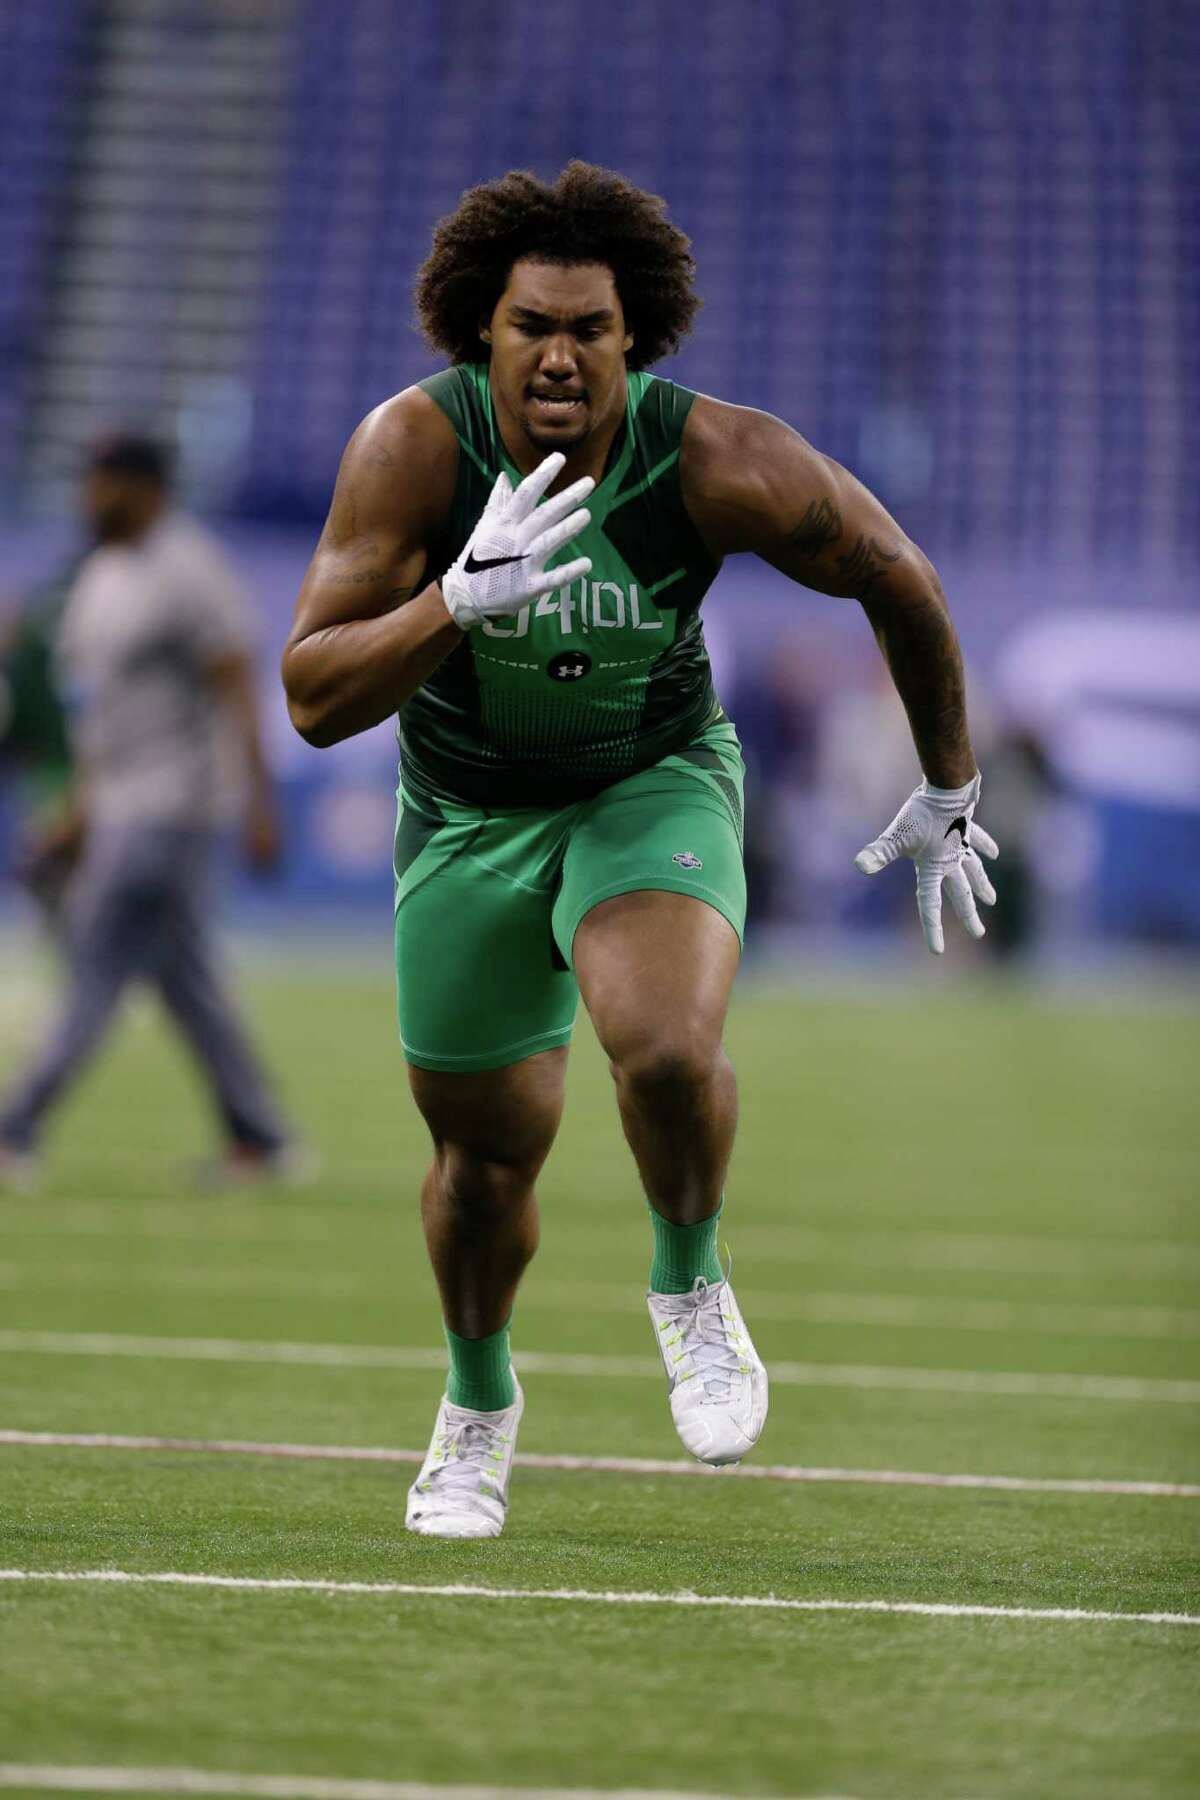 Southern Cal's Leonard Williams moves well for a 302-pounder.